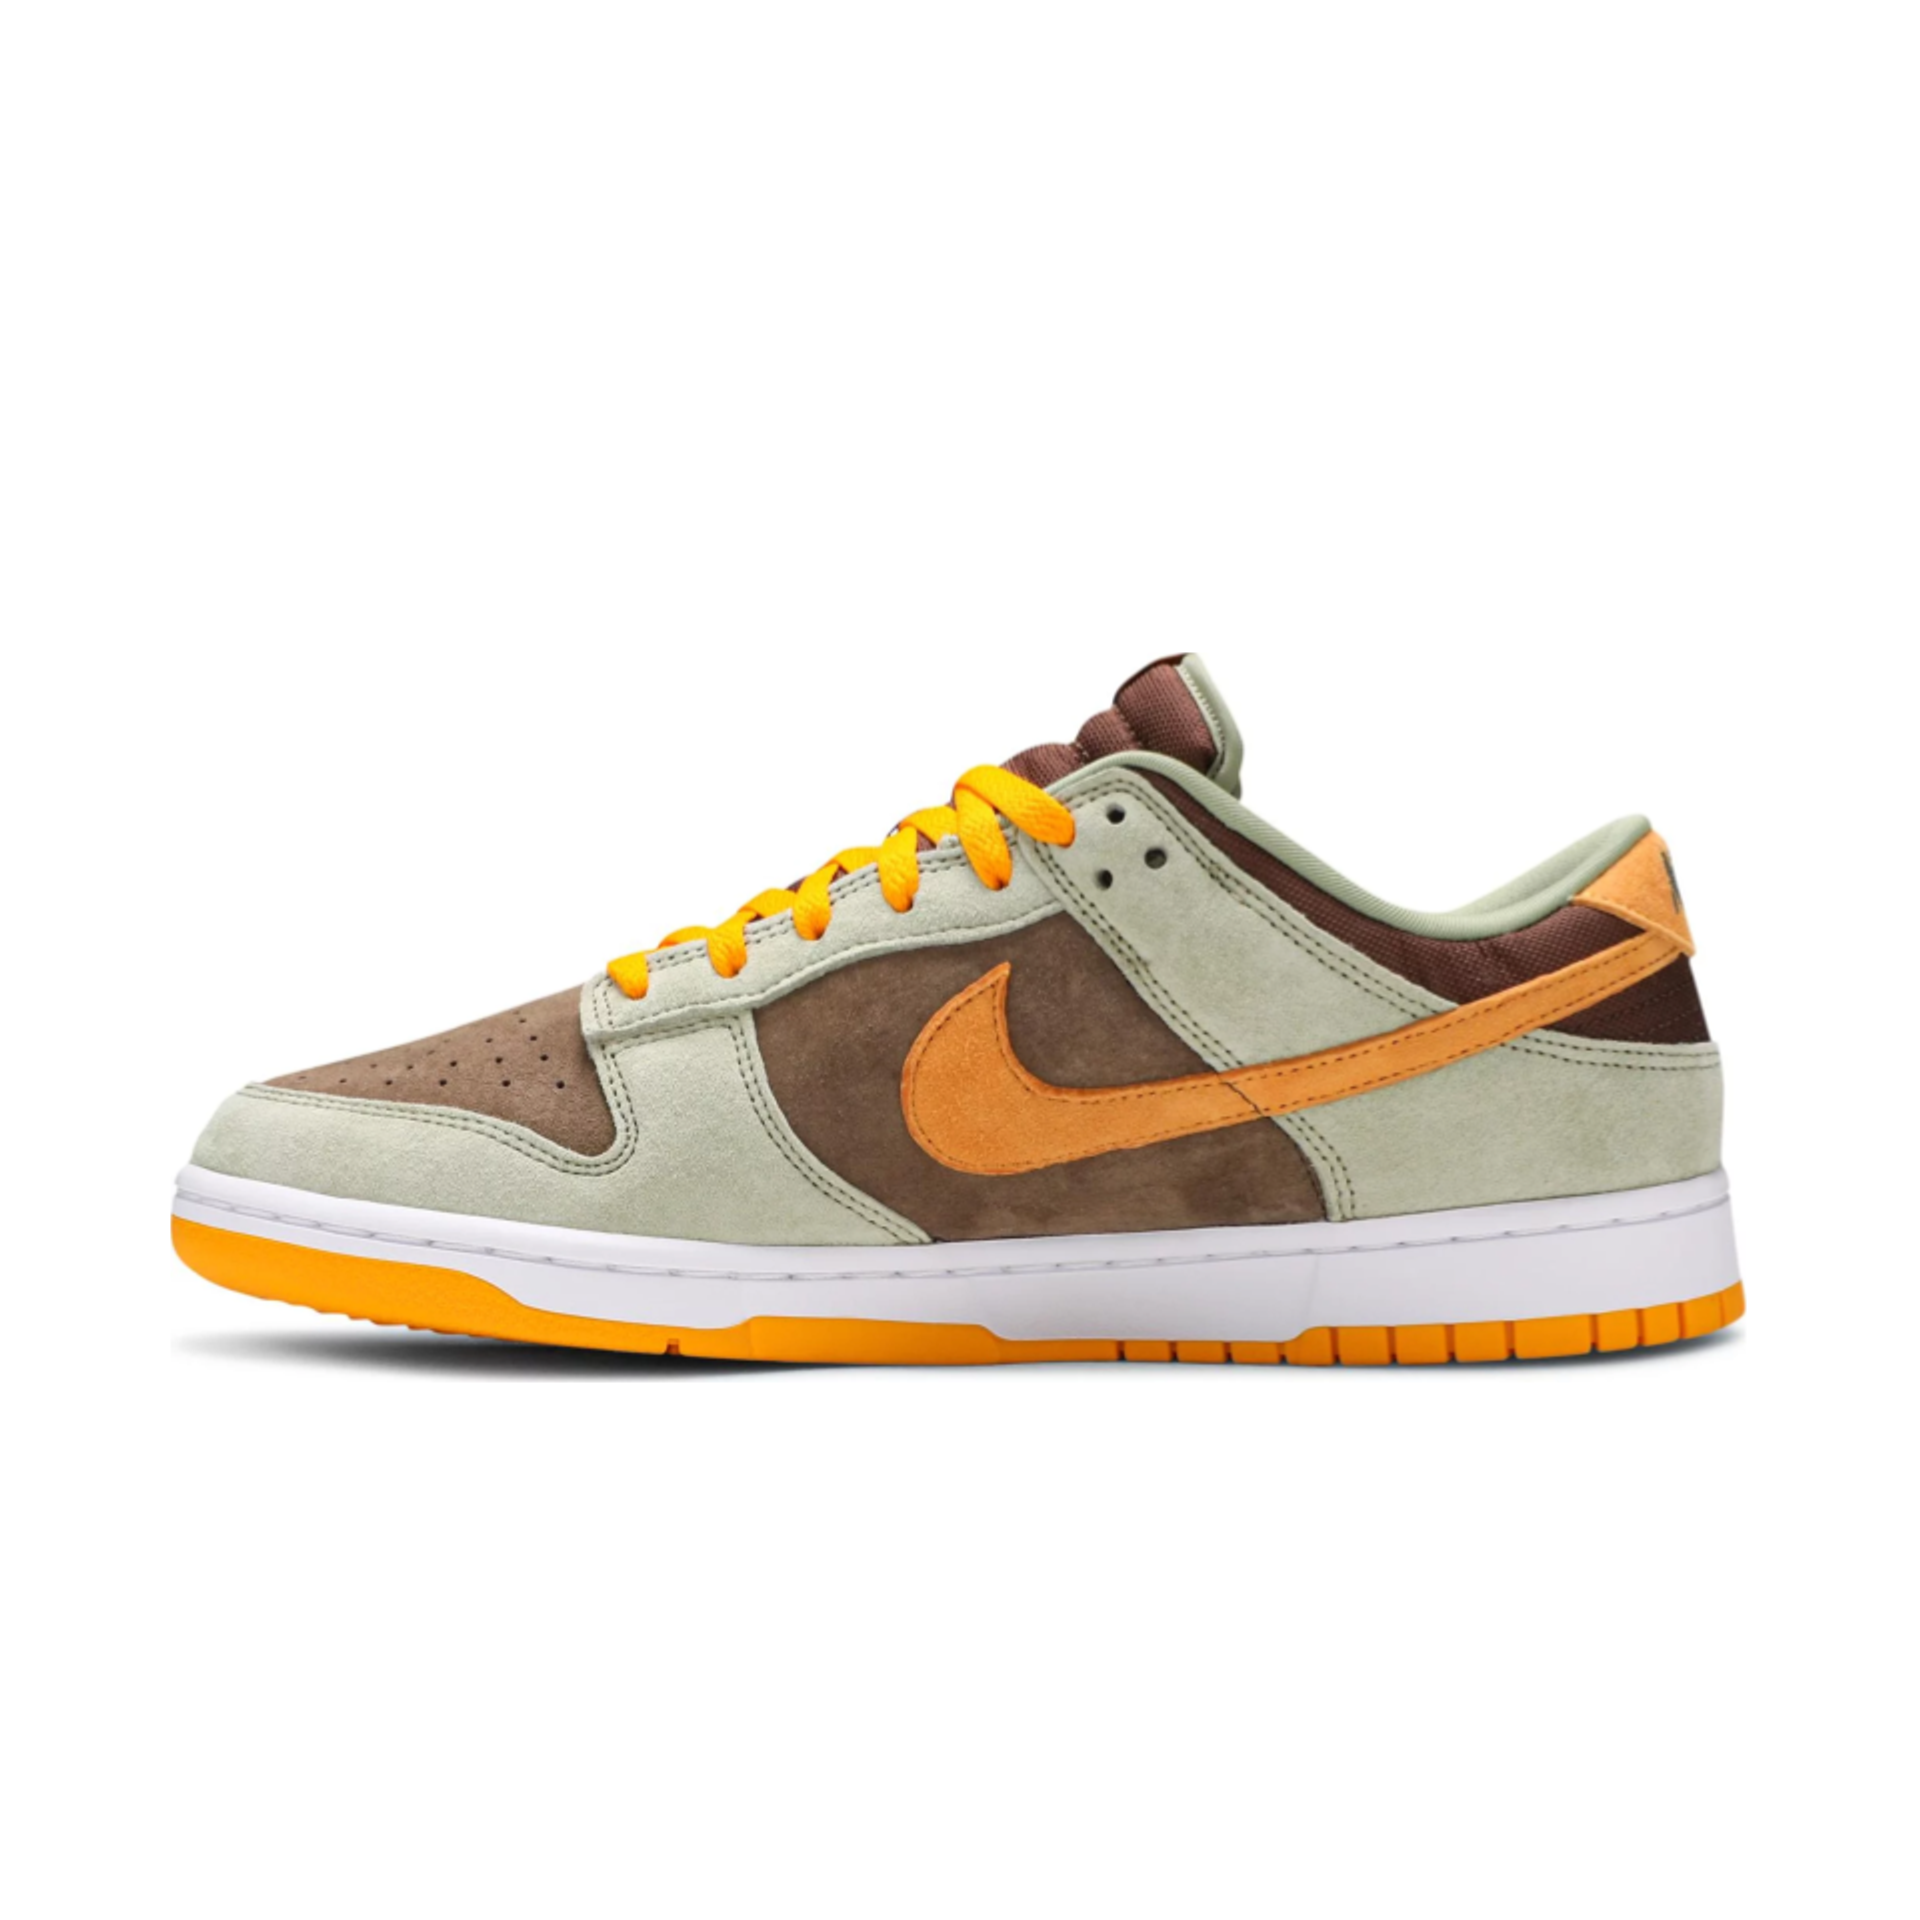 Nike Dunk Low 'Dusty Olive' - DH5360 300 | Ox Street